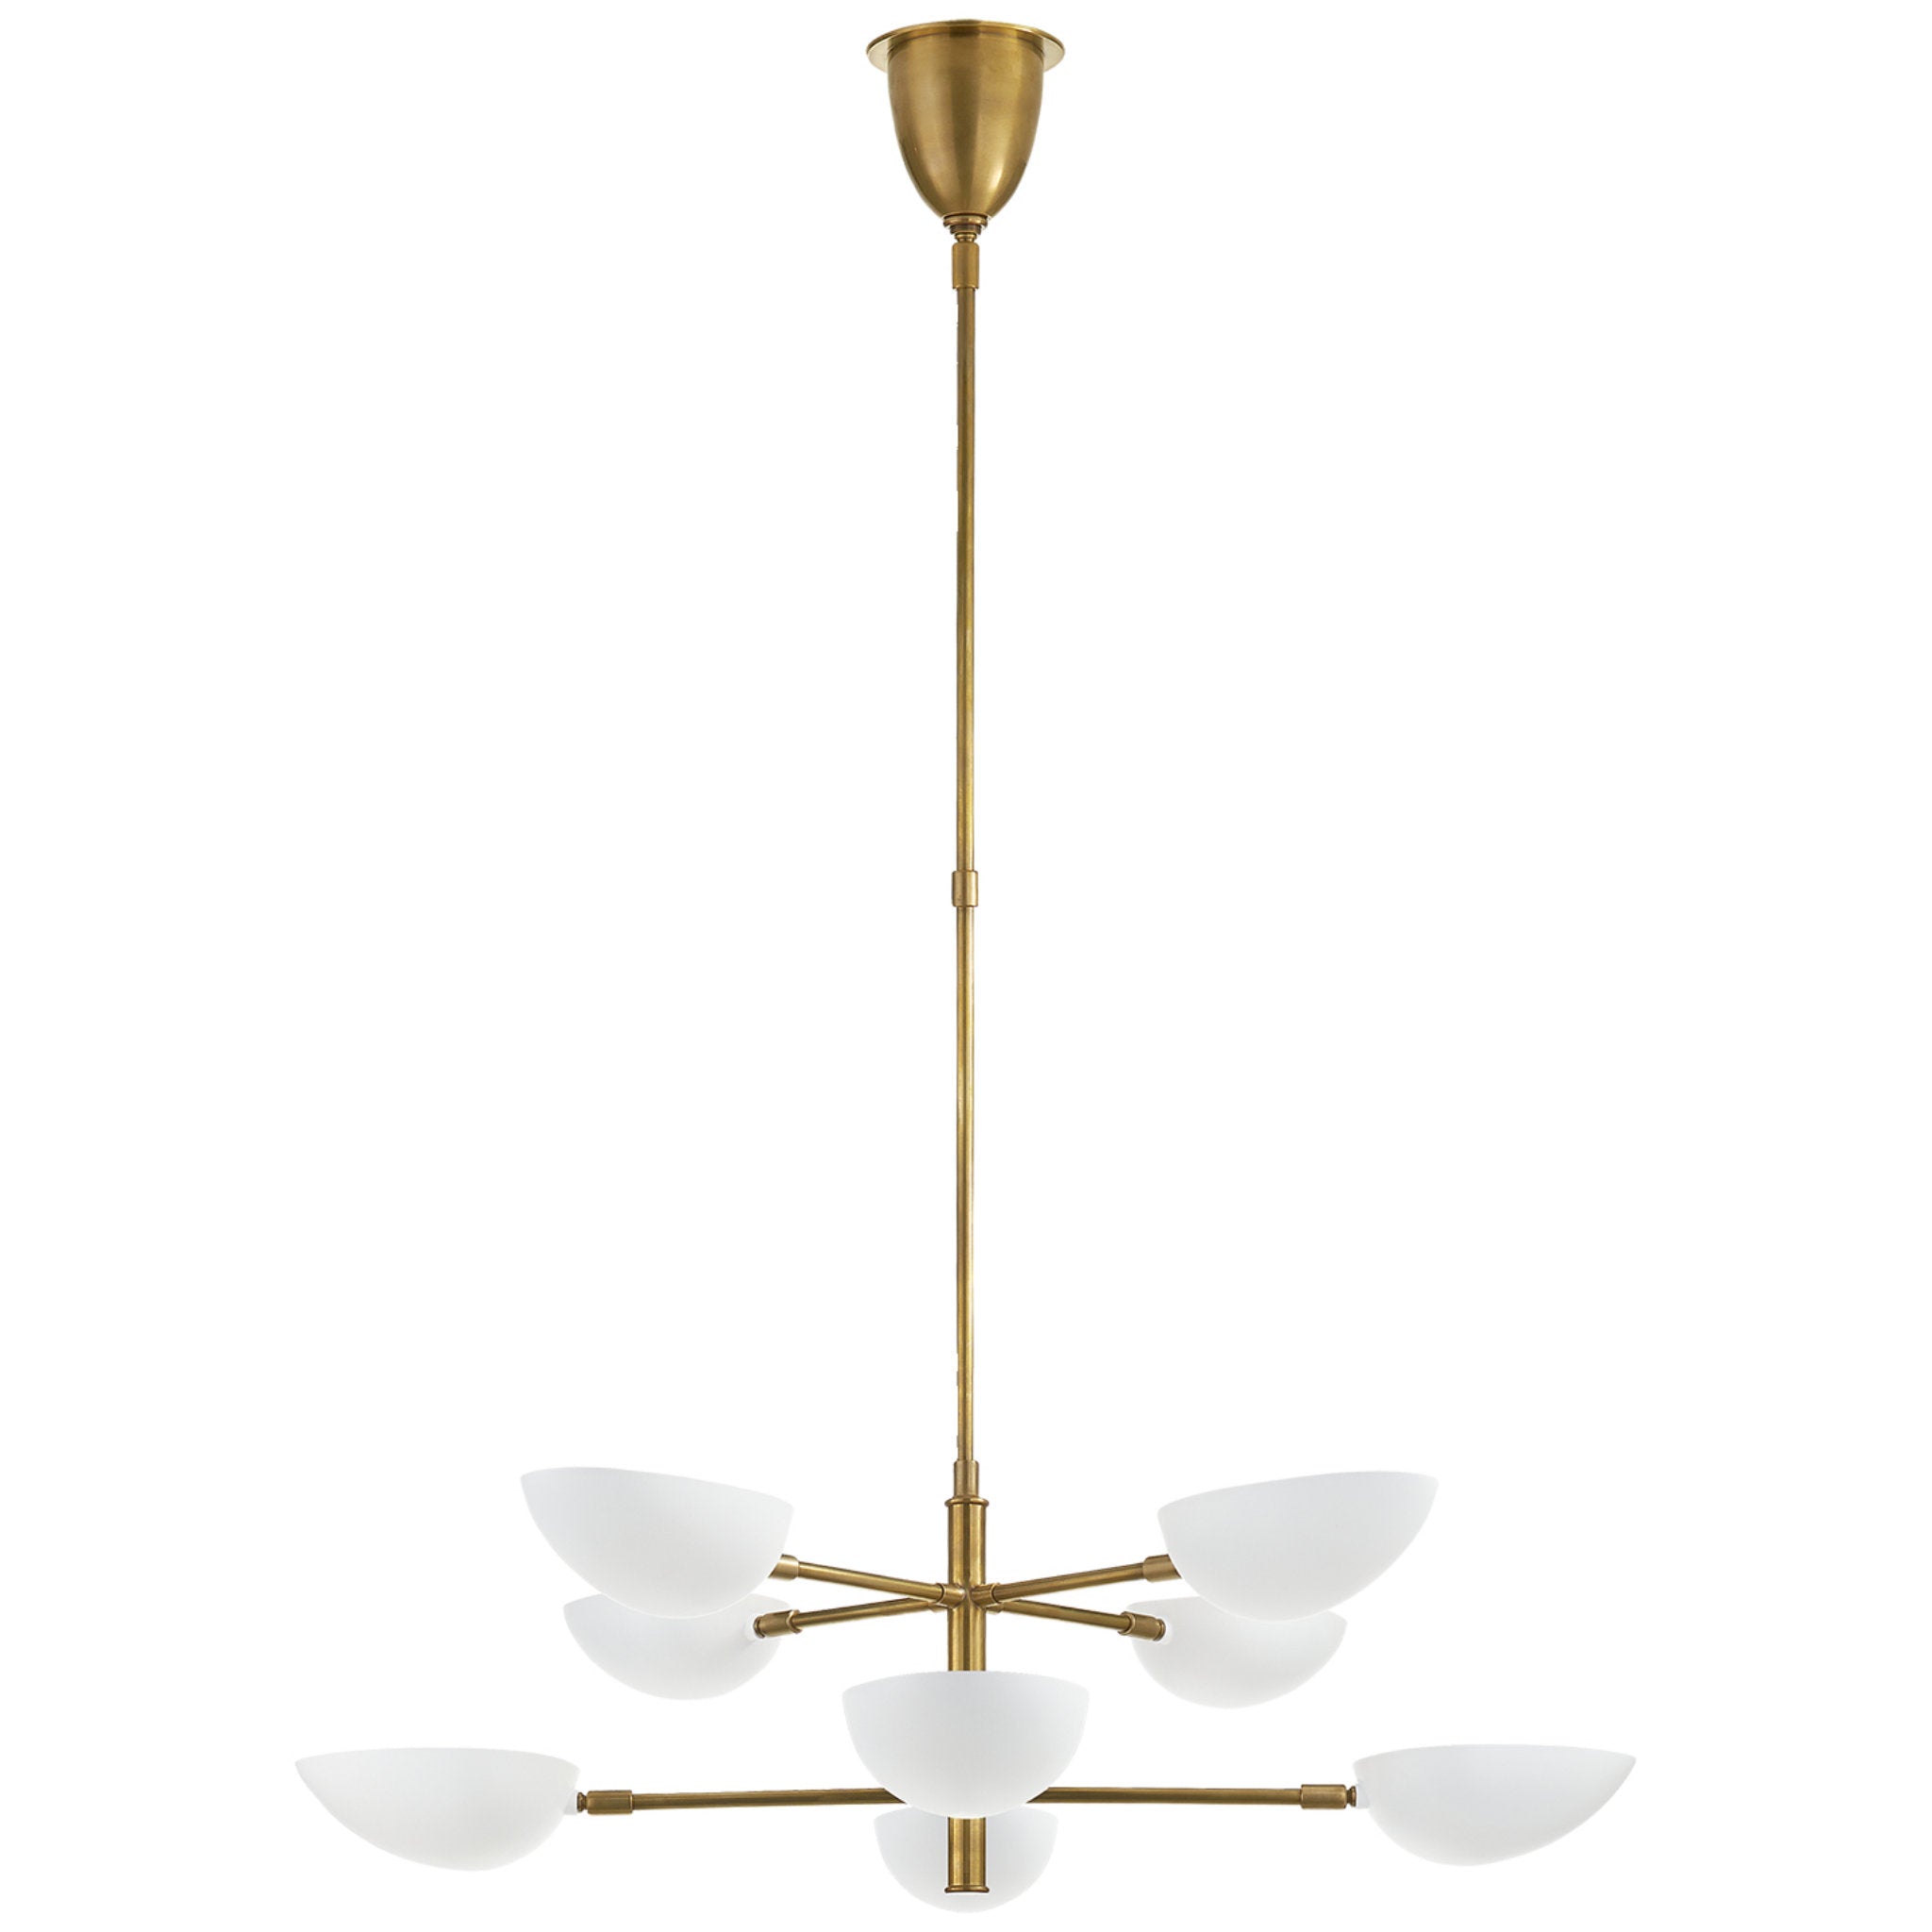 AERIN Graphic Large Two-Tier Chandelier in Hand-Rubbed Antique Brass w